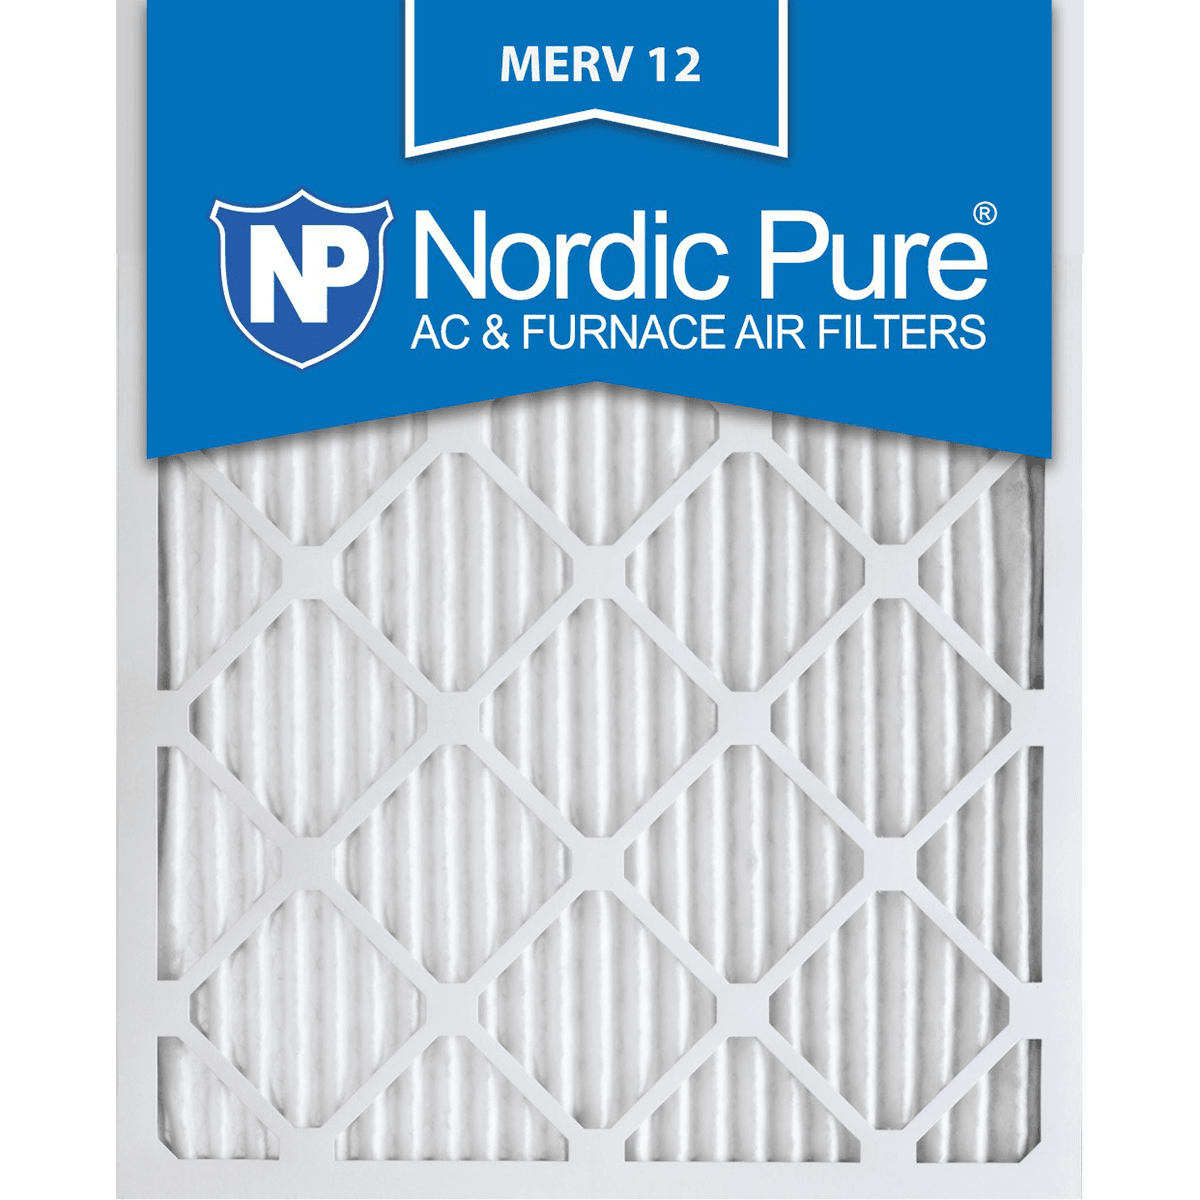 Nordic Pure Merv 12 Pleated Furnace Filter 16x25x1